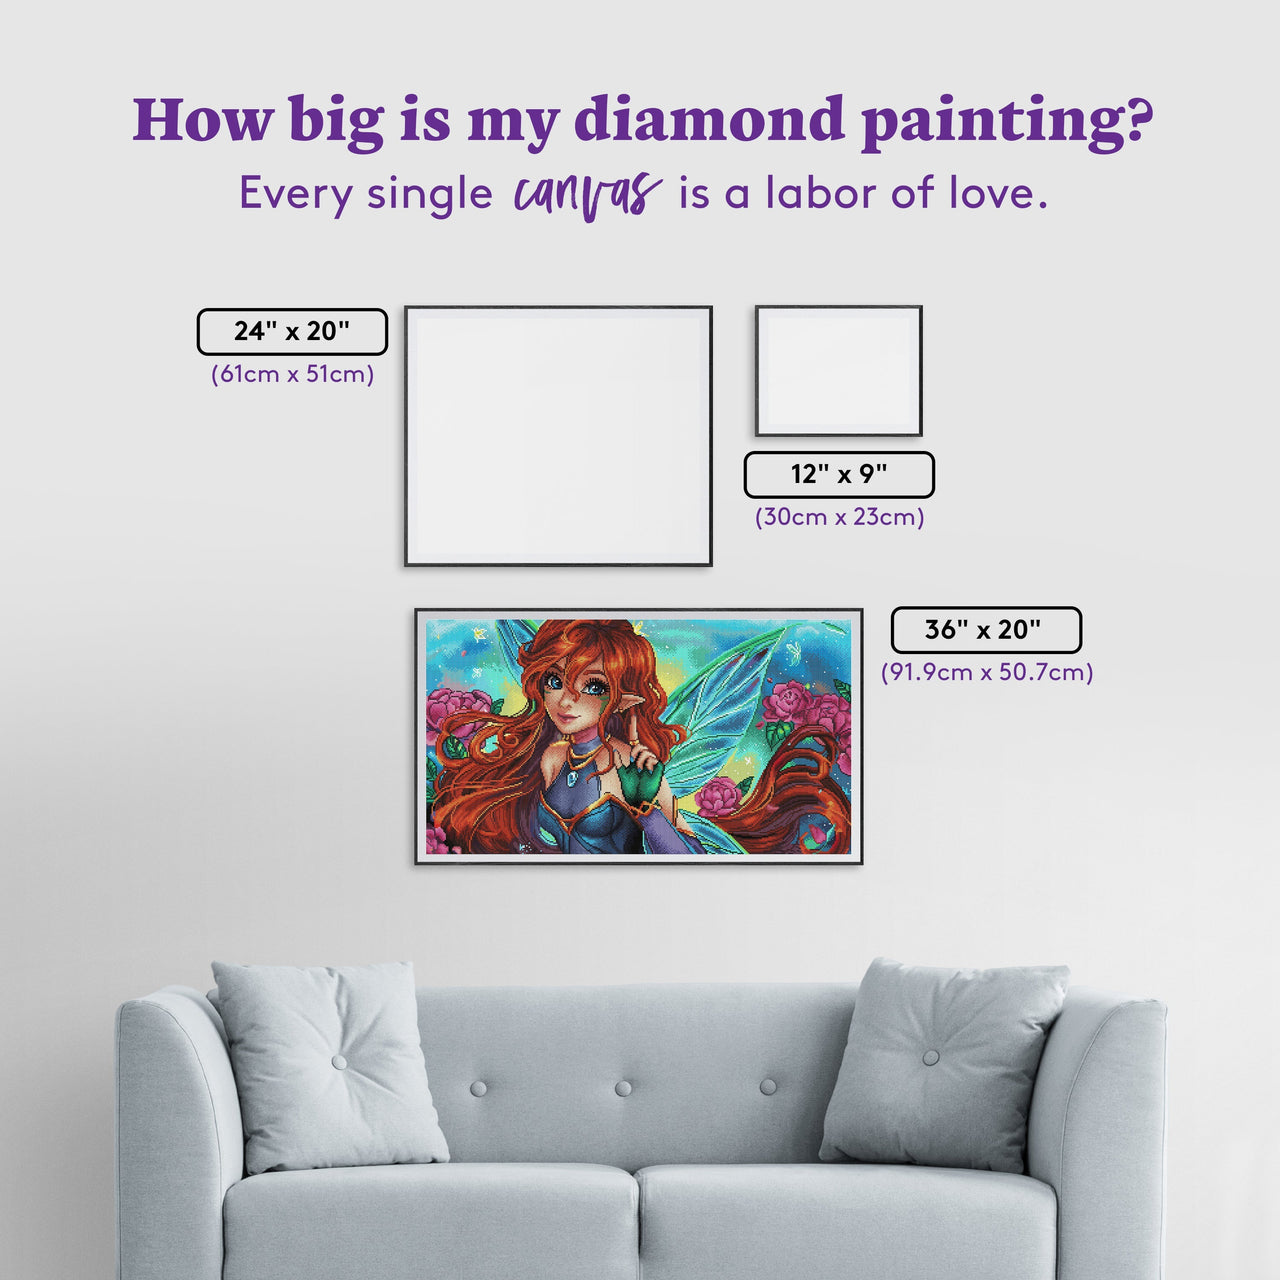 Diamond Painting Flower Fairy 36" x 20" (91.9cm x 50.7cm) / Round with 63 Colors including 2 ABs and 4 Fairy Dust Diamonds / 59,368